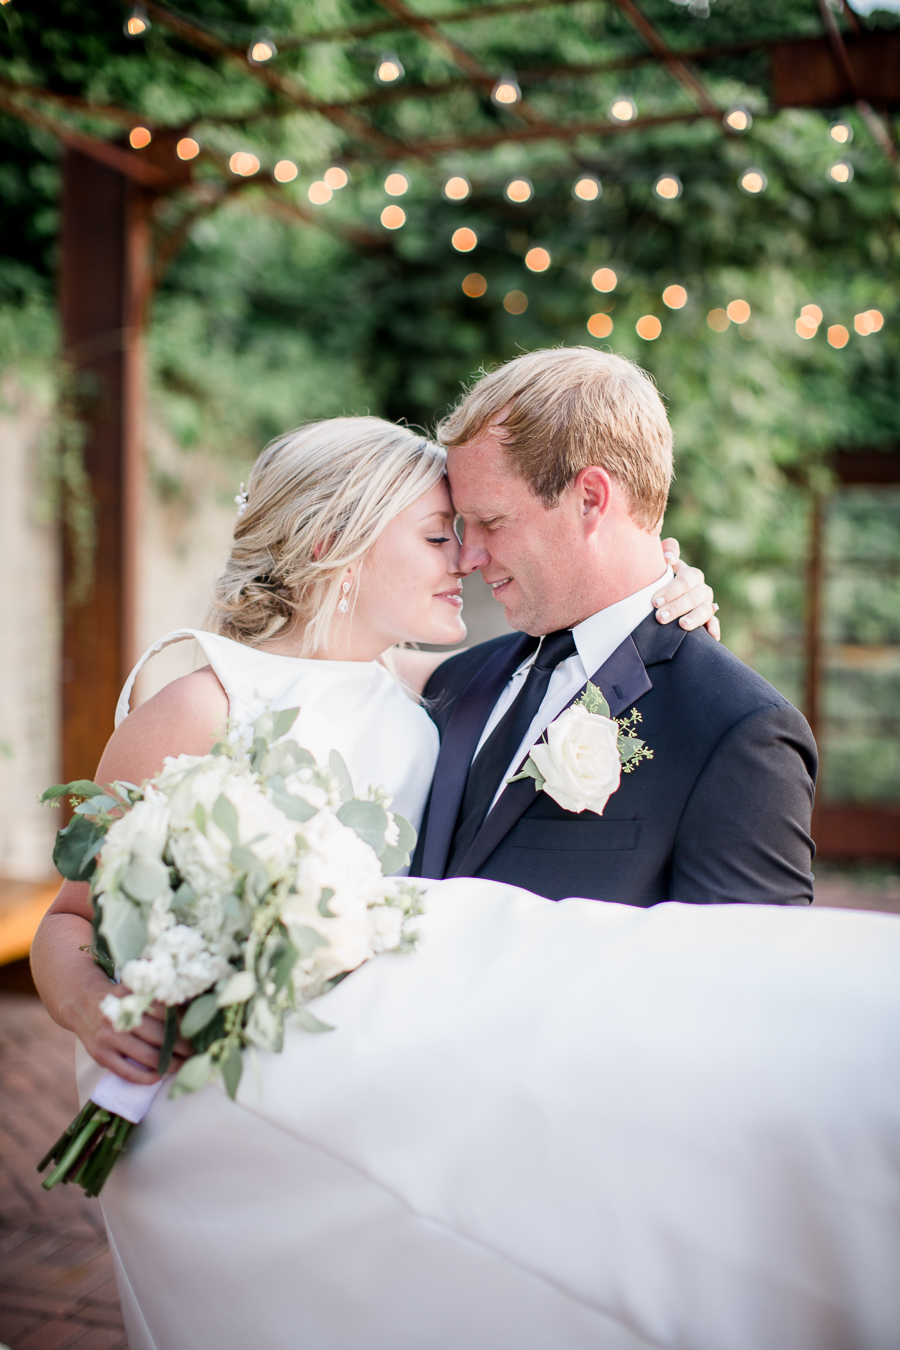 Kissing holding bride at this wedding at The Standard by Knoxville Wedding Photographer, Amanda May Photos.